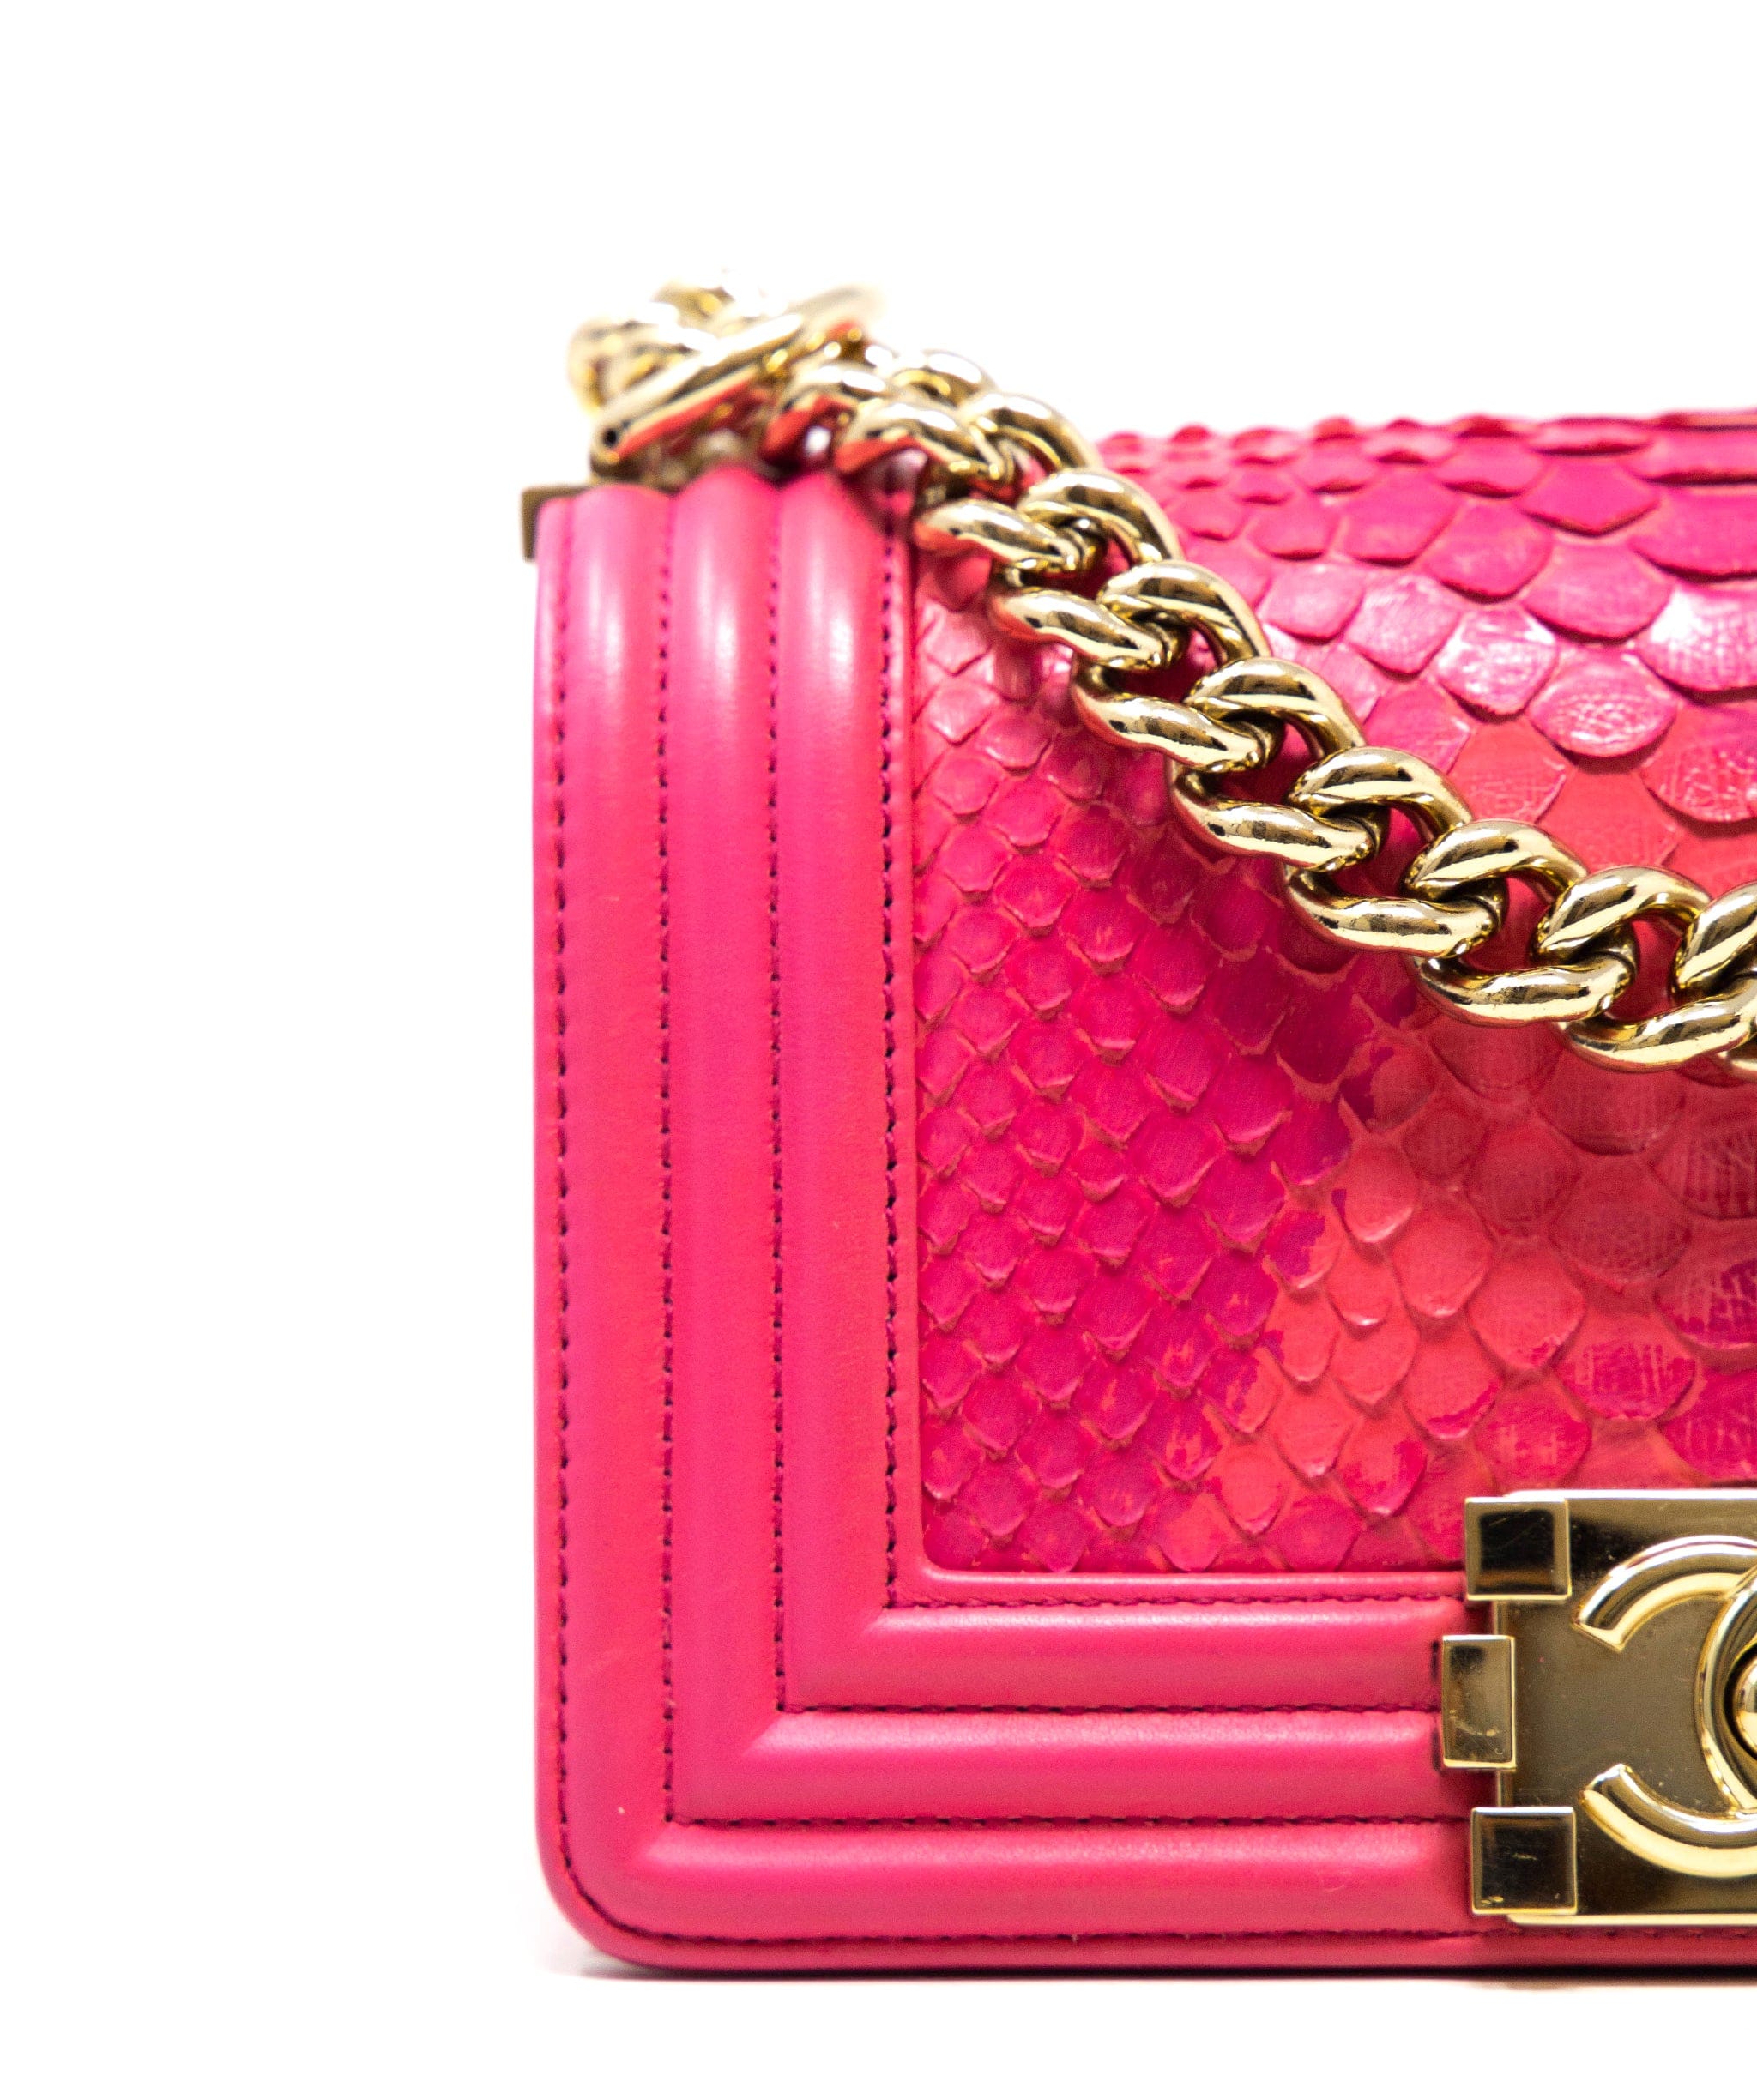 Chanel hot pink python boy bag, with champagne gold hardware ...